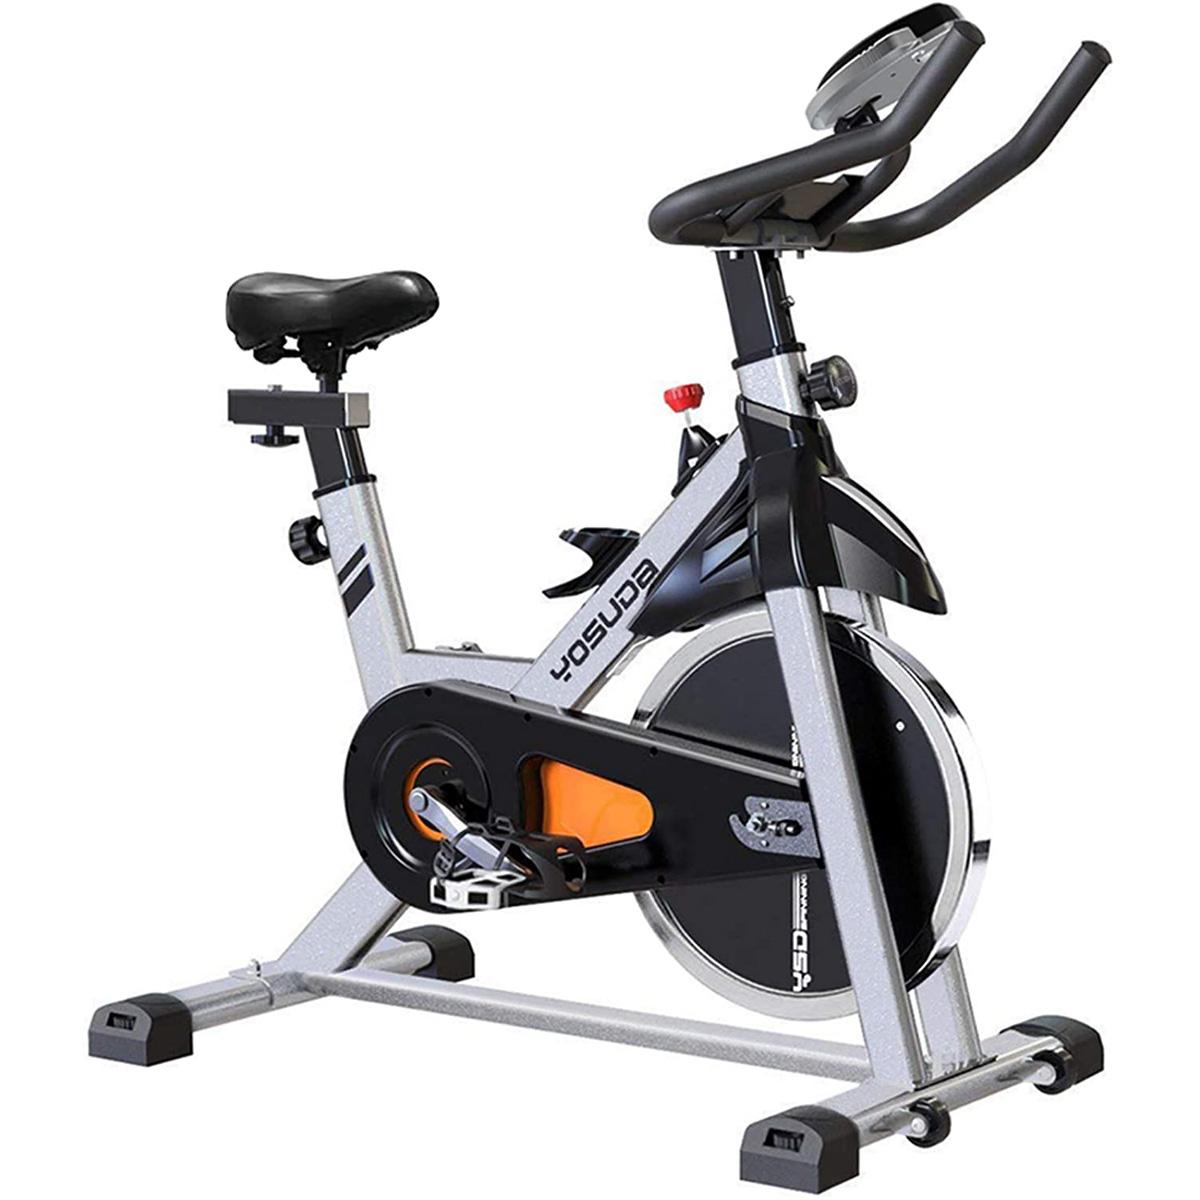 Yosuda L-001A Indoor Cycling Bike Stationary for $249.99 Shipped